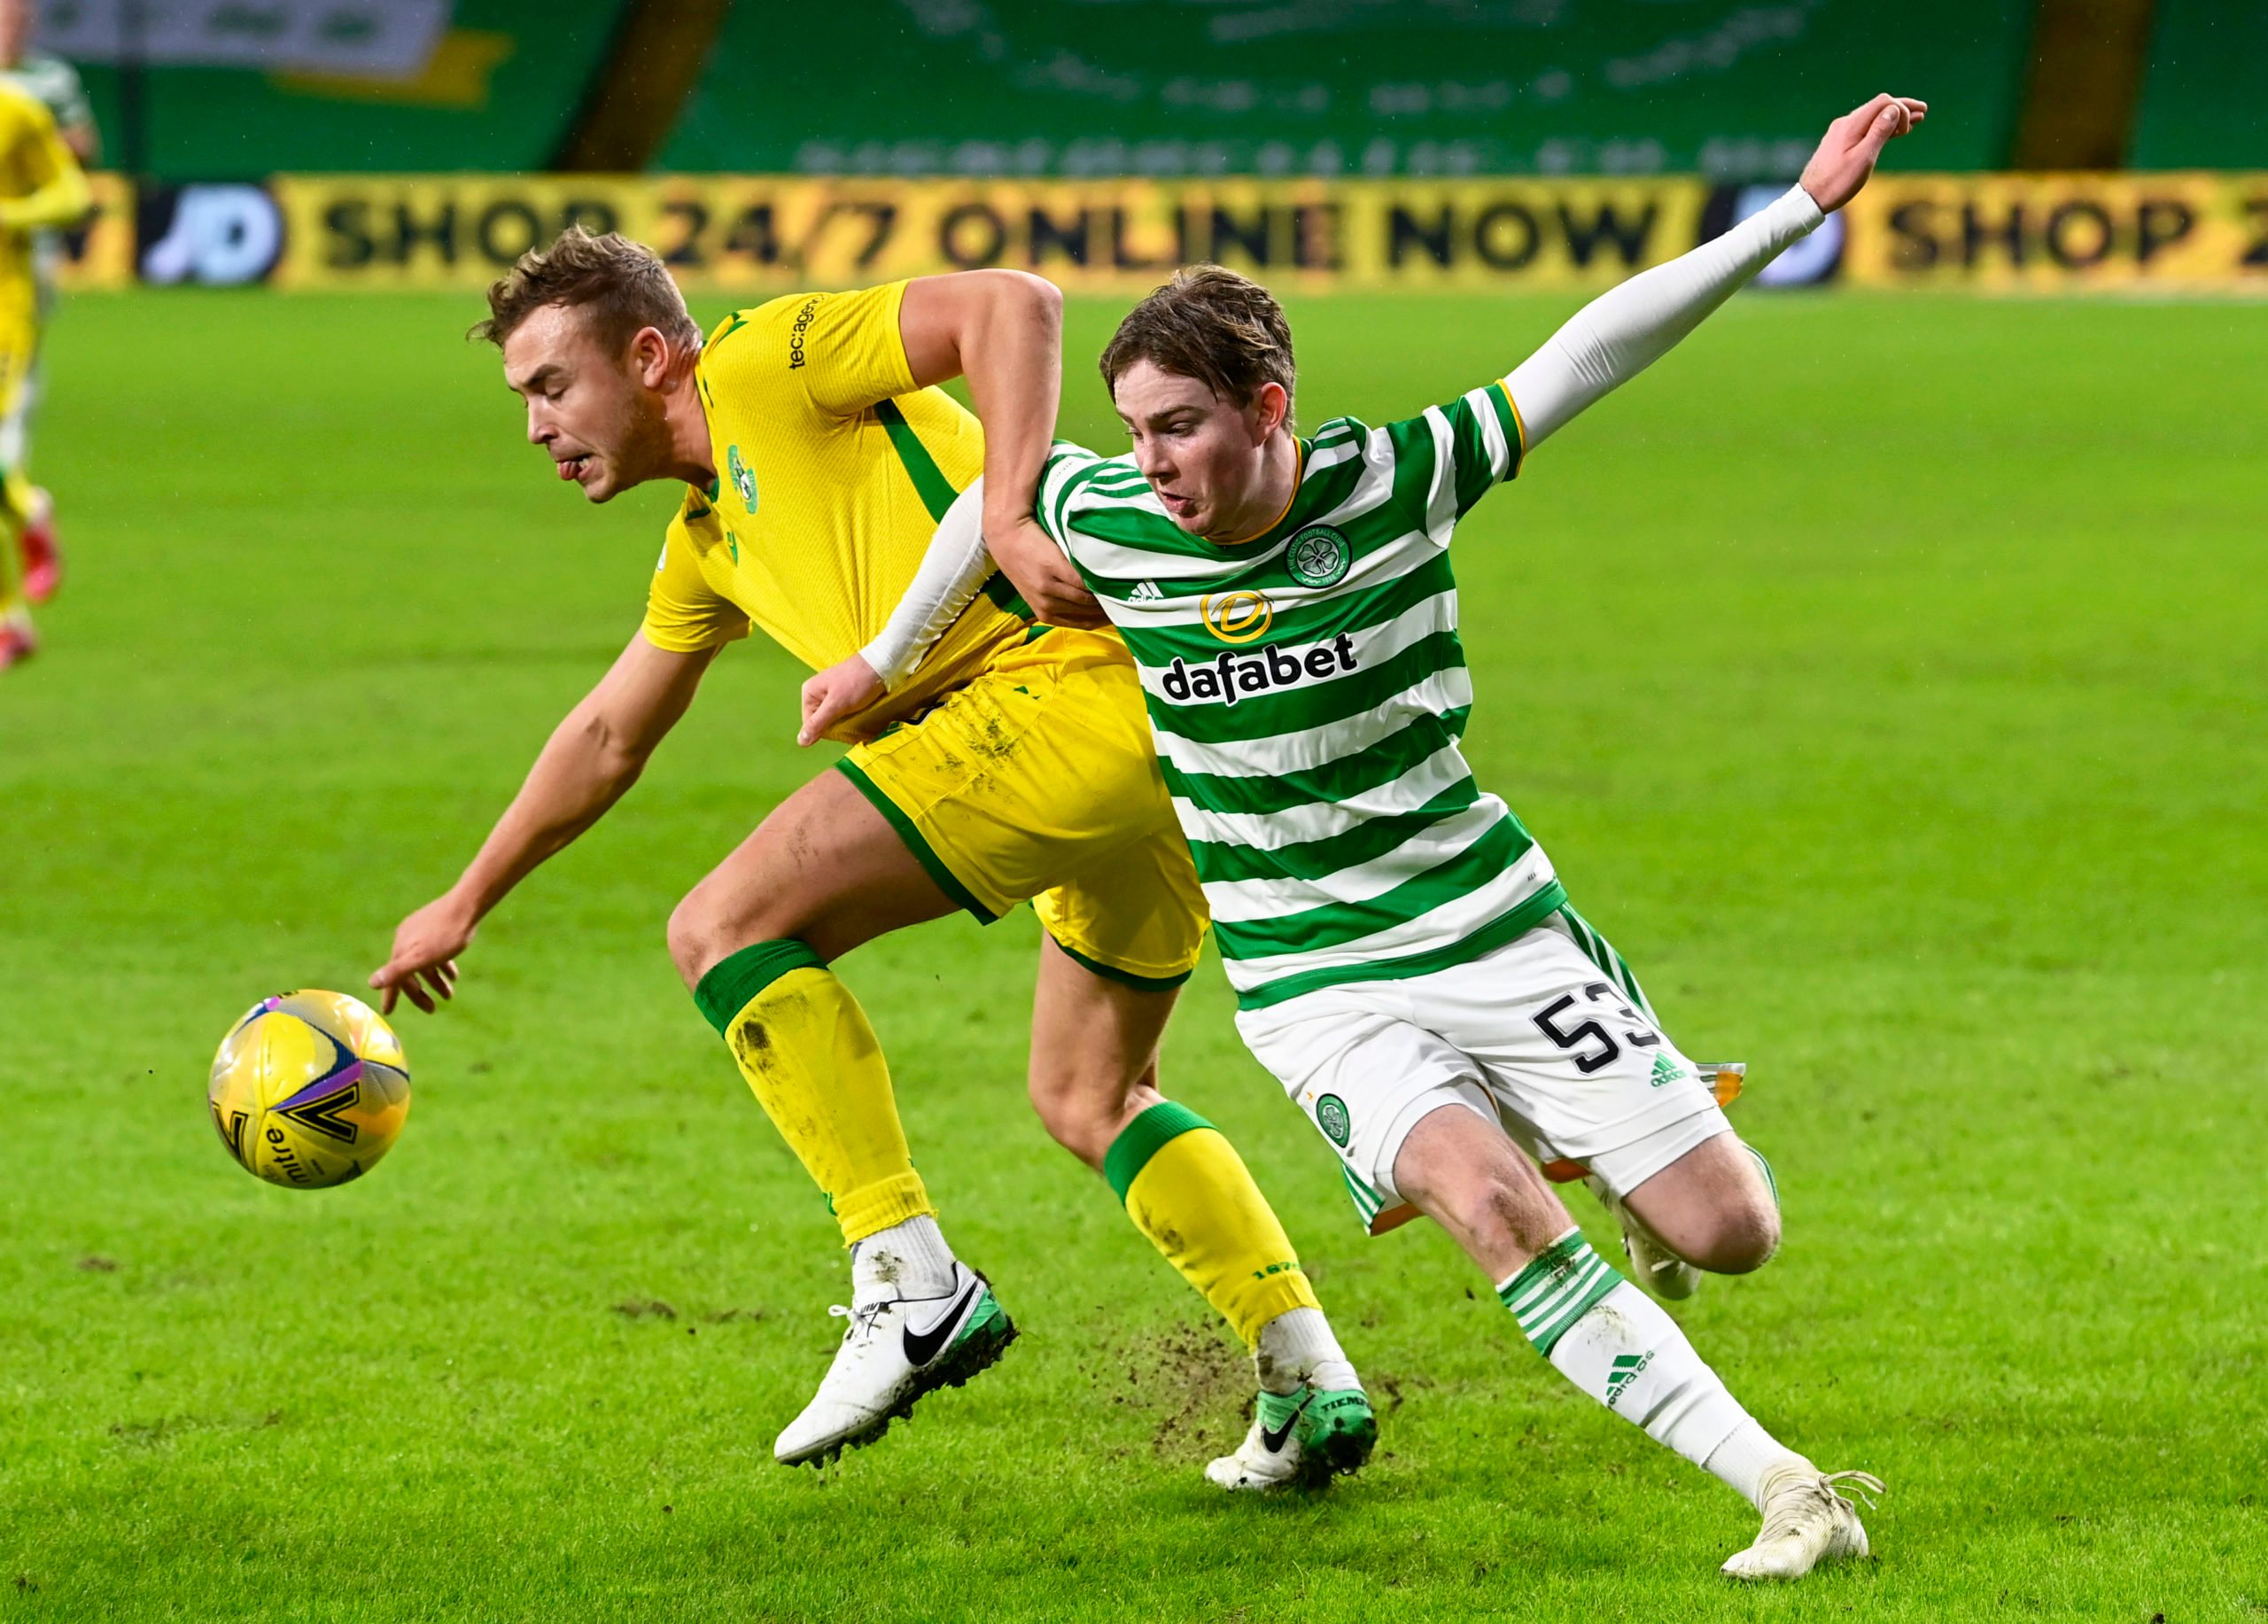 Celtic Academy players keep leaving, and fans need answers